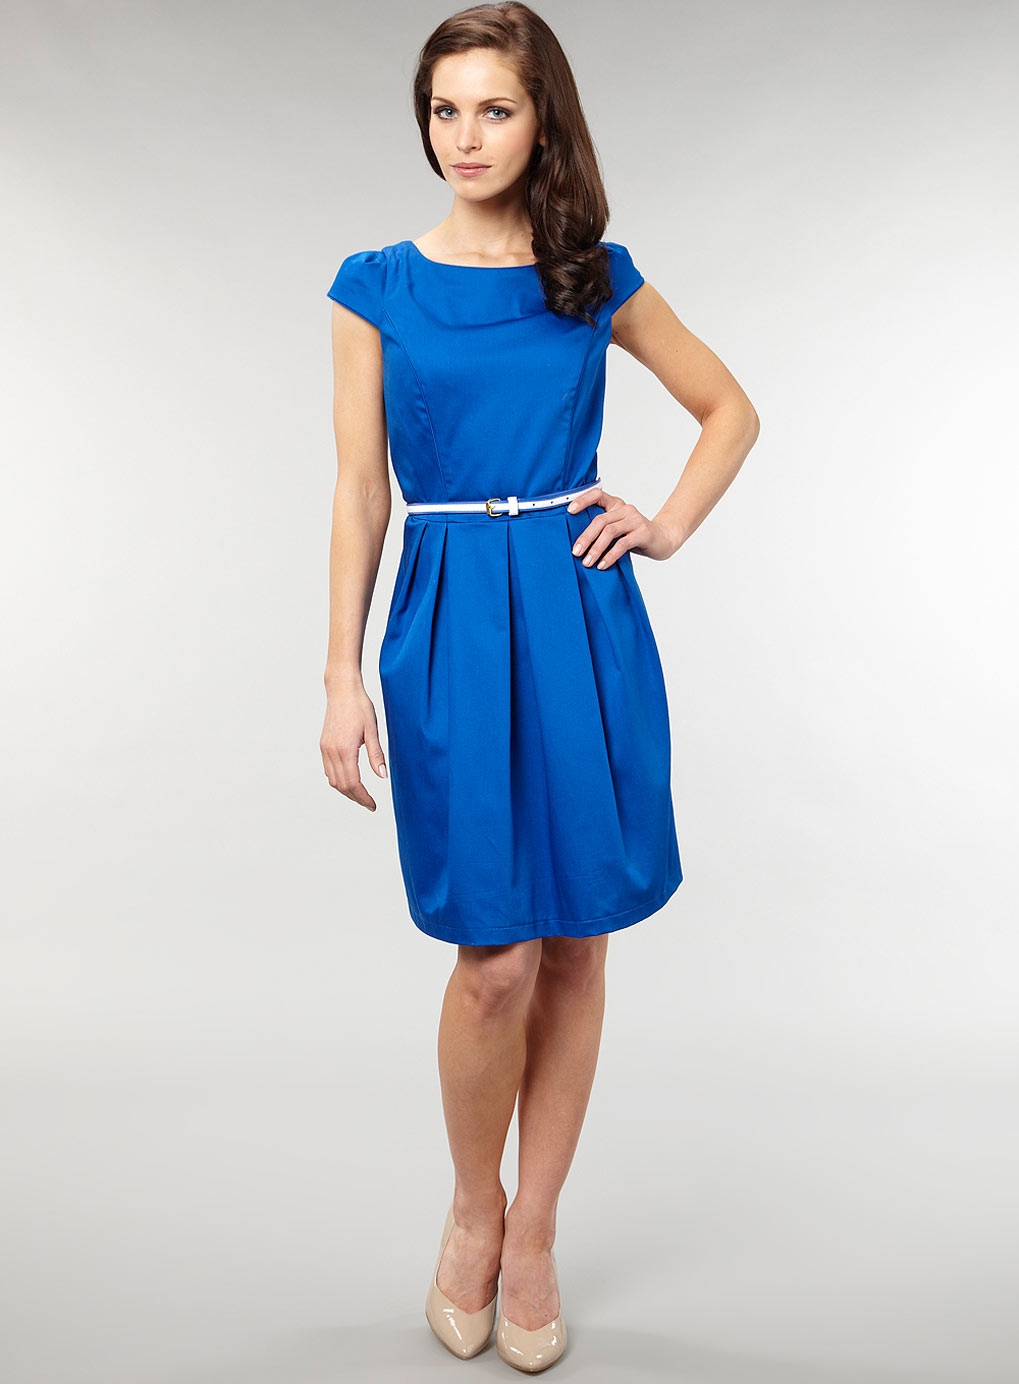 lil' miss Scatterbrain: Dorothy Perkins dresses and more